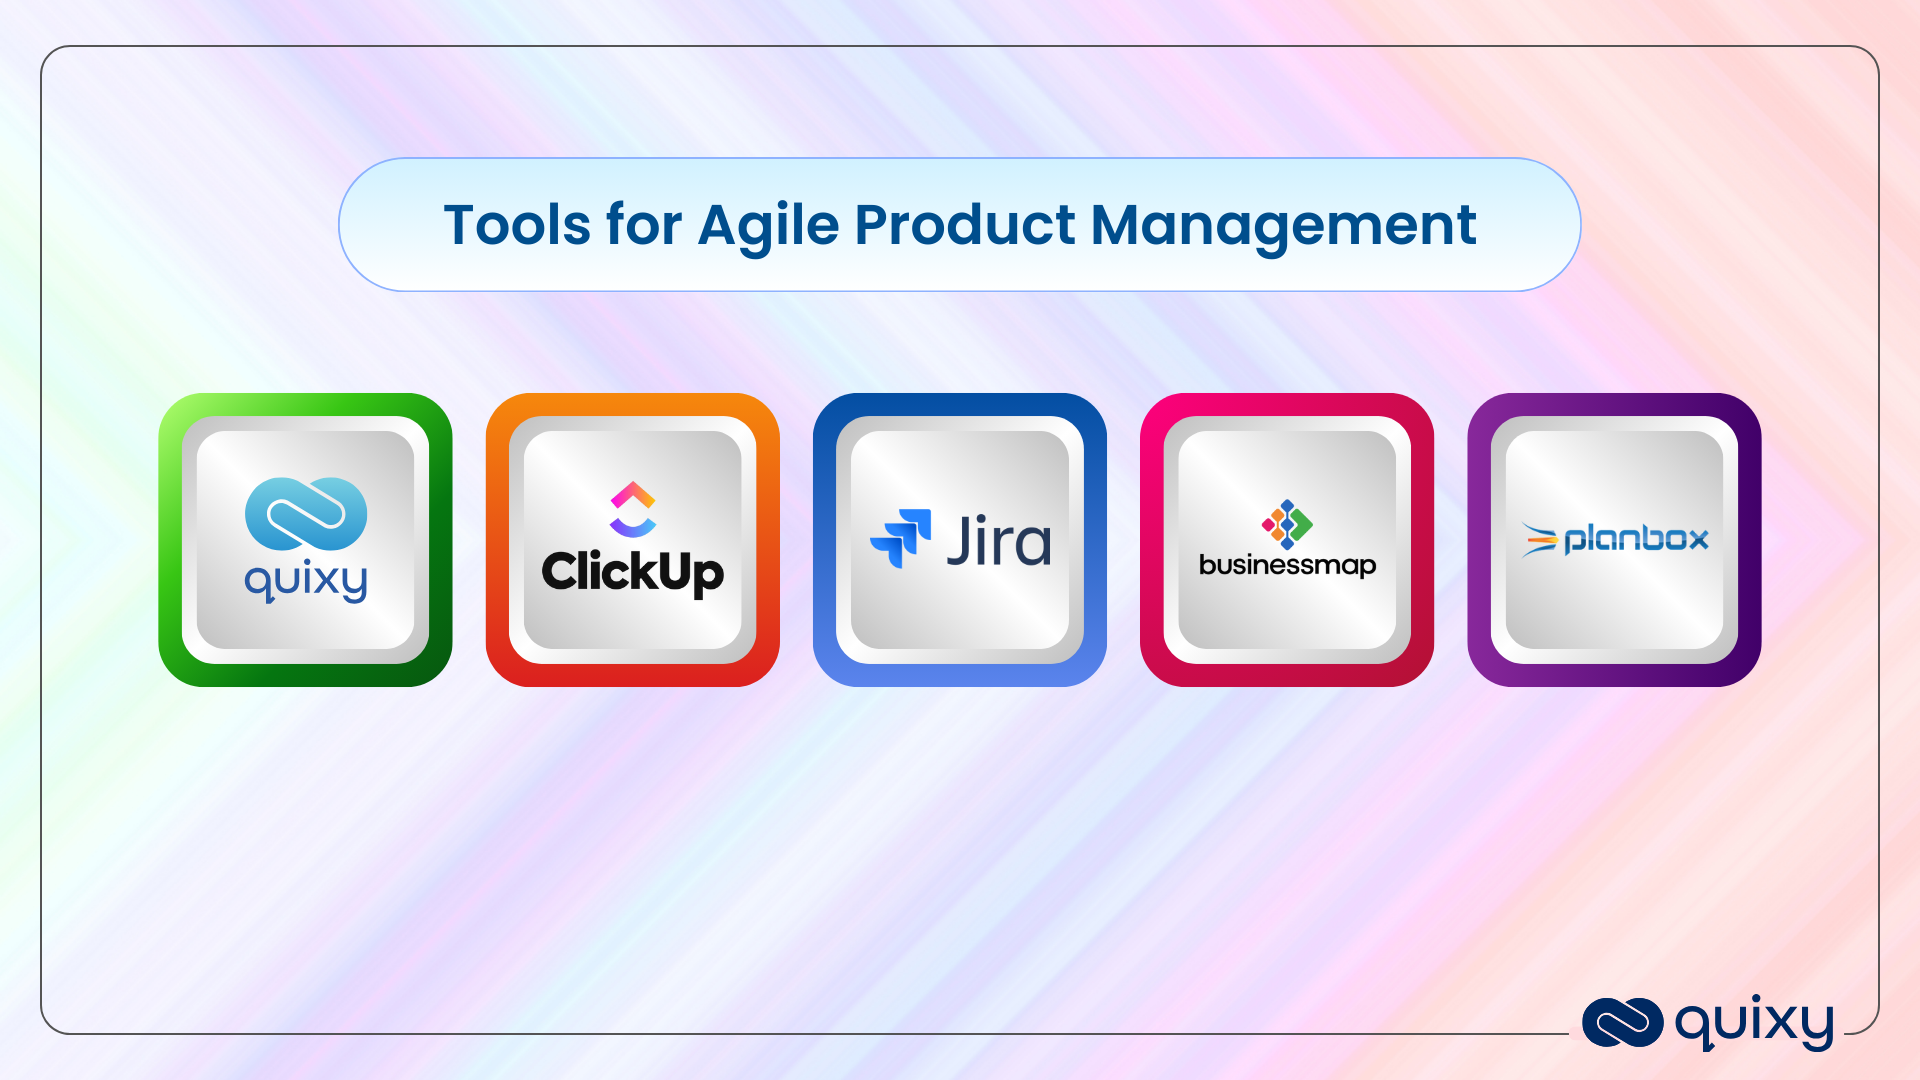 Tools for Agile Product Management